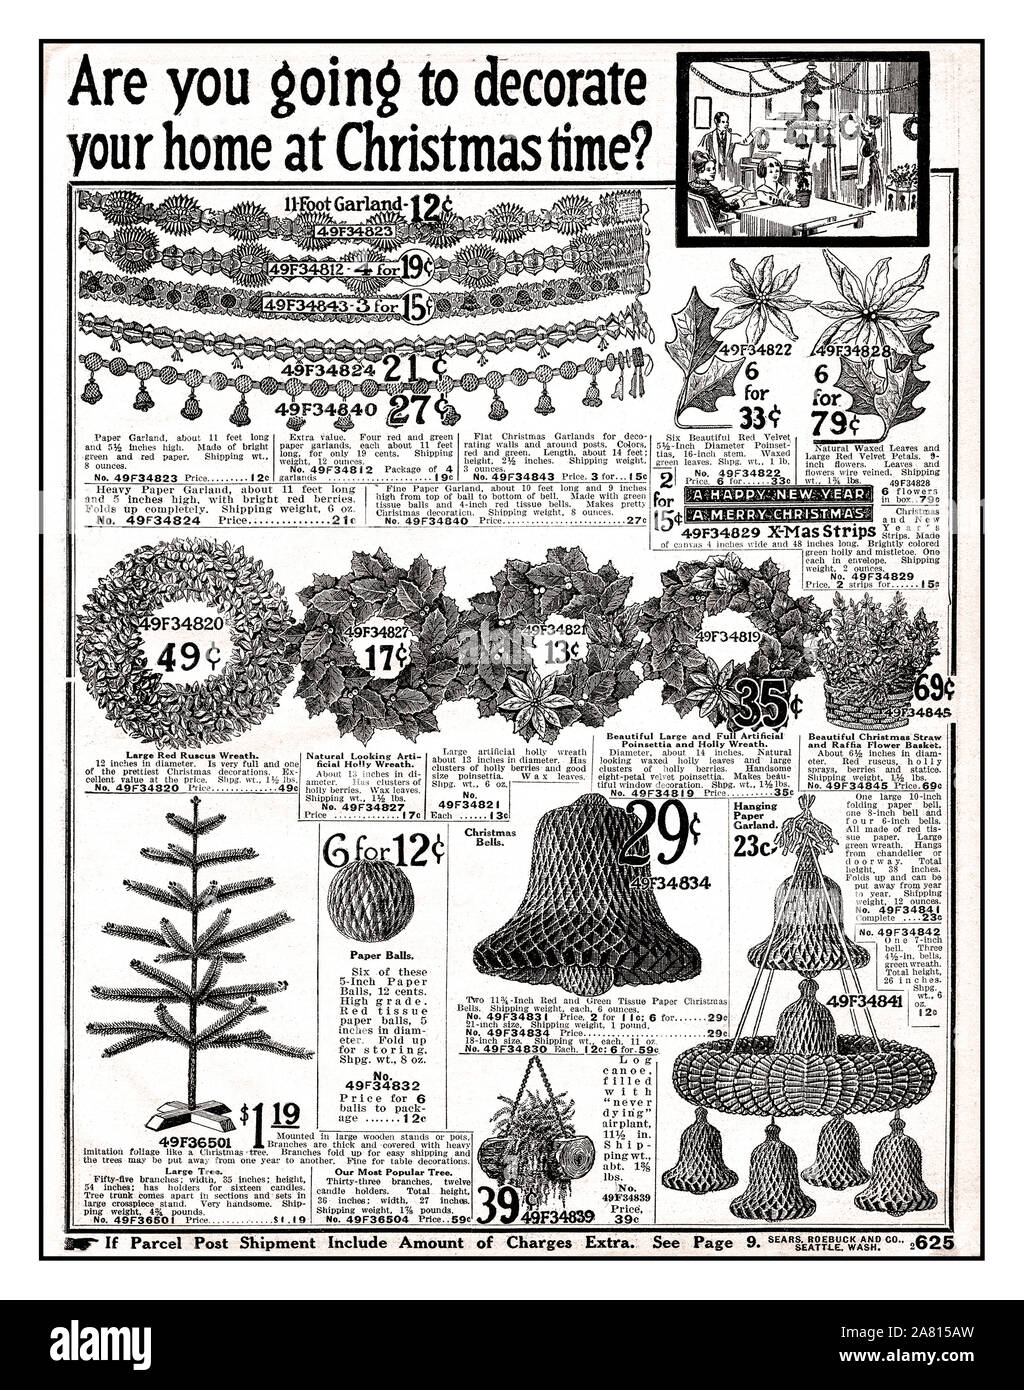 Vintage 1900’s Christmas catalogue advertising page filled with variety of historic Christmas decorating items for the home and Christmas tree page from 1916 Sears Roebuck and Co. catalogue. 'Are you going to decorate your home at Christmas time'? Published during first World War WW1 USA Stock Photo